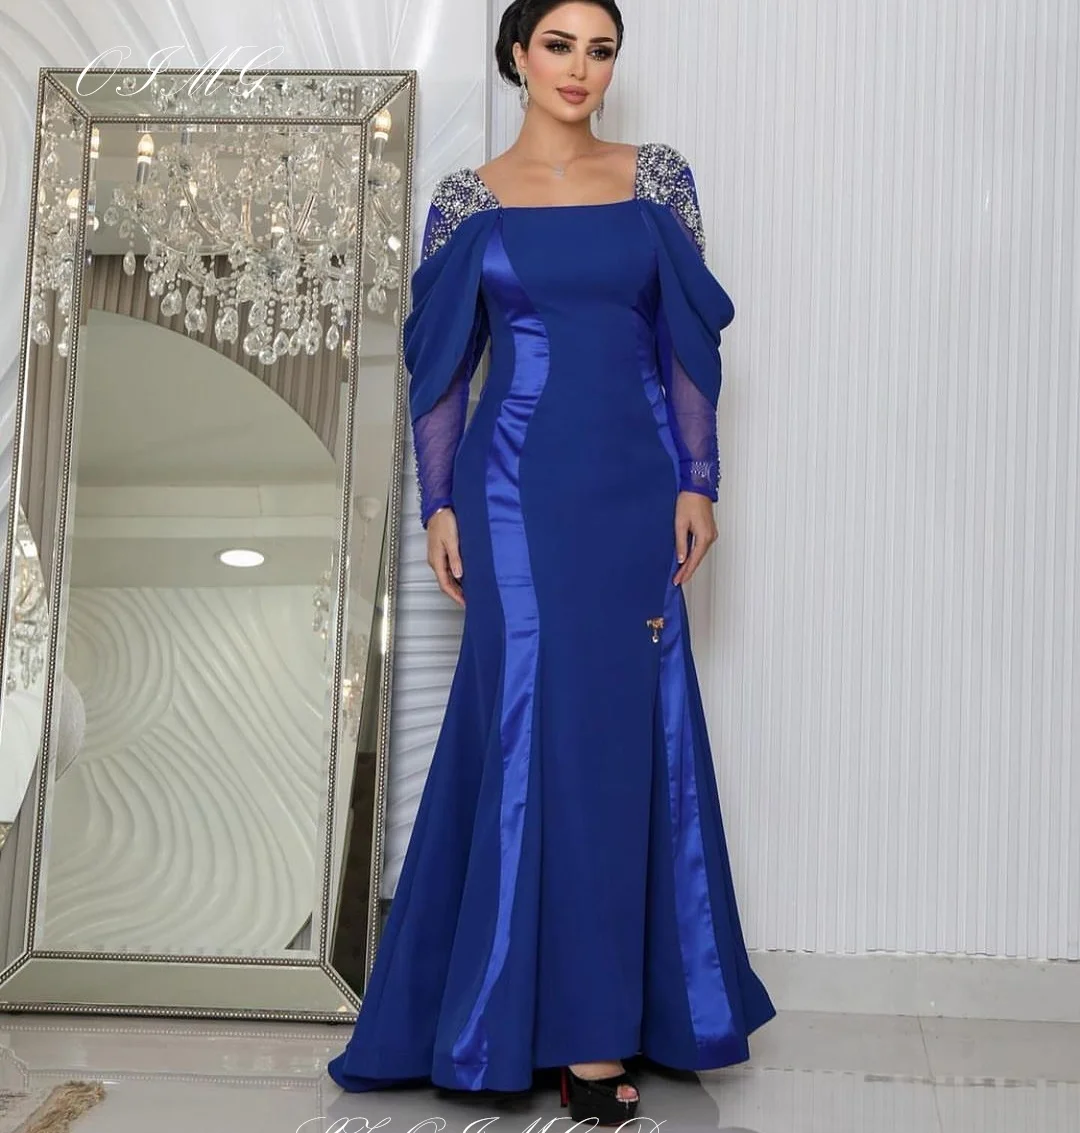 

OIMG Blue Prom Dresses Saudi Arabic Women Off the Shoulder Sheath Sequined Evening Gowns with Cape Occasion Formal Party Dress